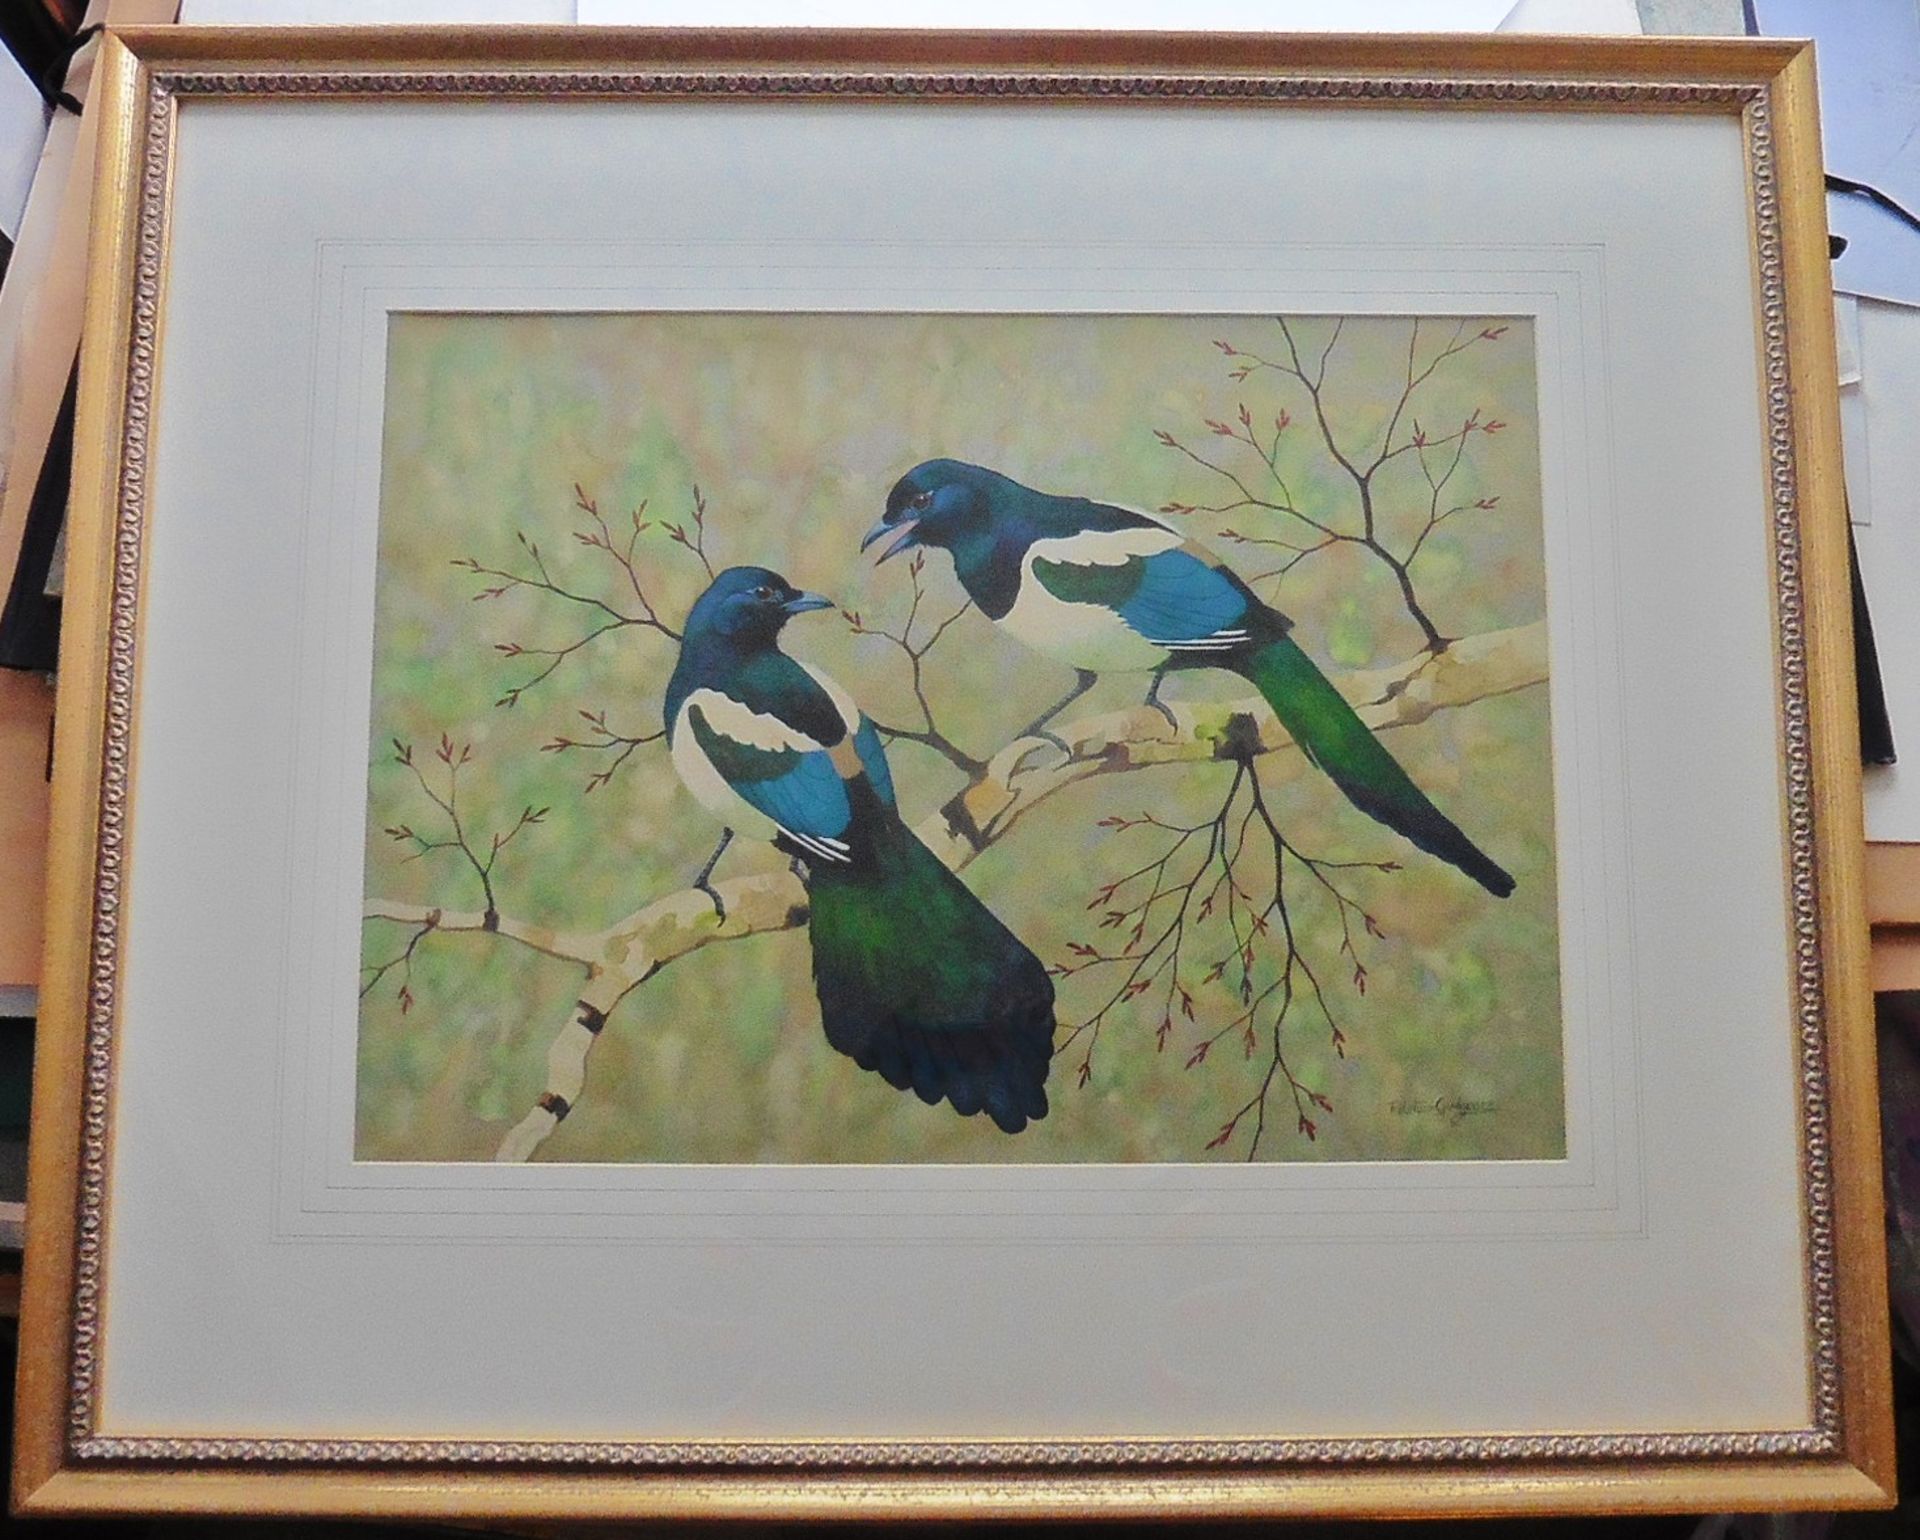 Ralston Gudgeon, Scottish 1910- 1984 large signed watercolour 'Magpies' Title Magpies Artist : - Image 2 of 4